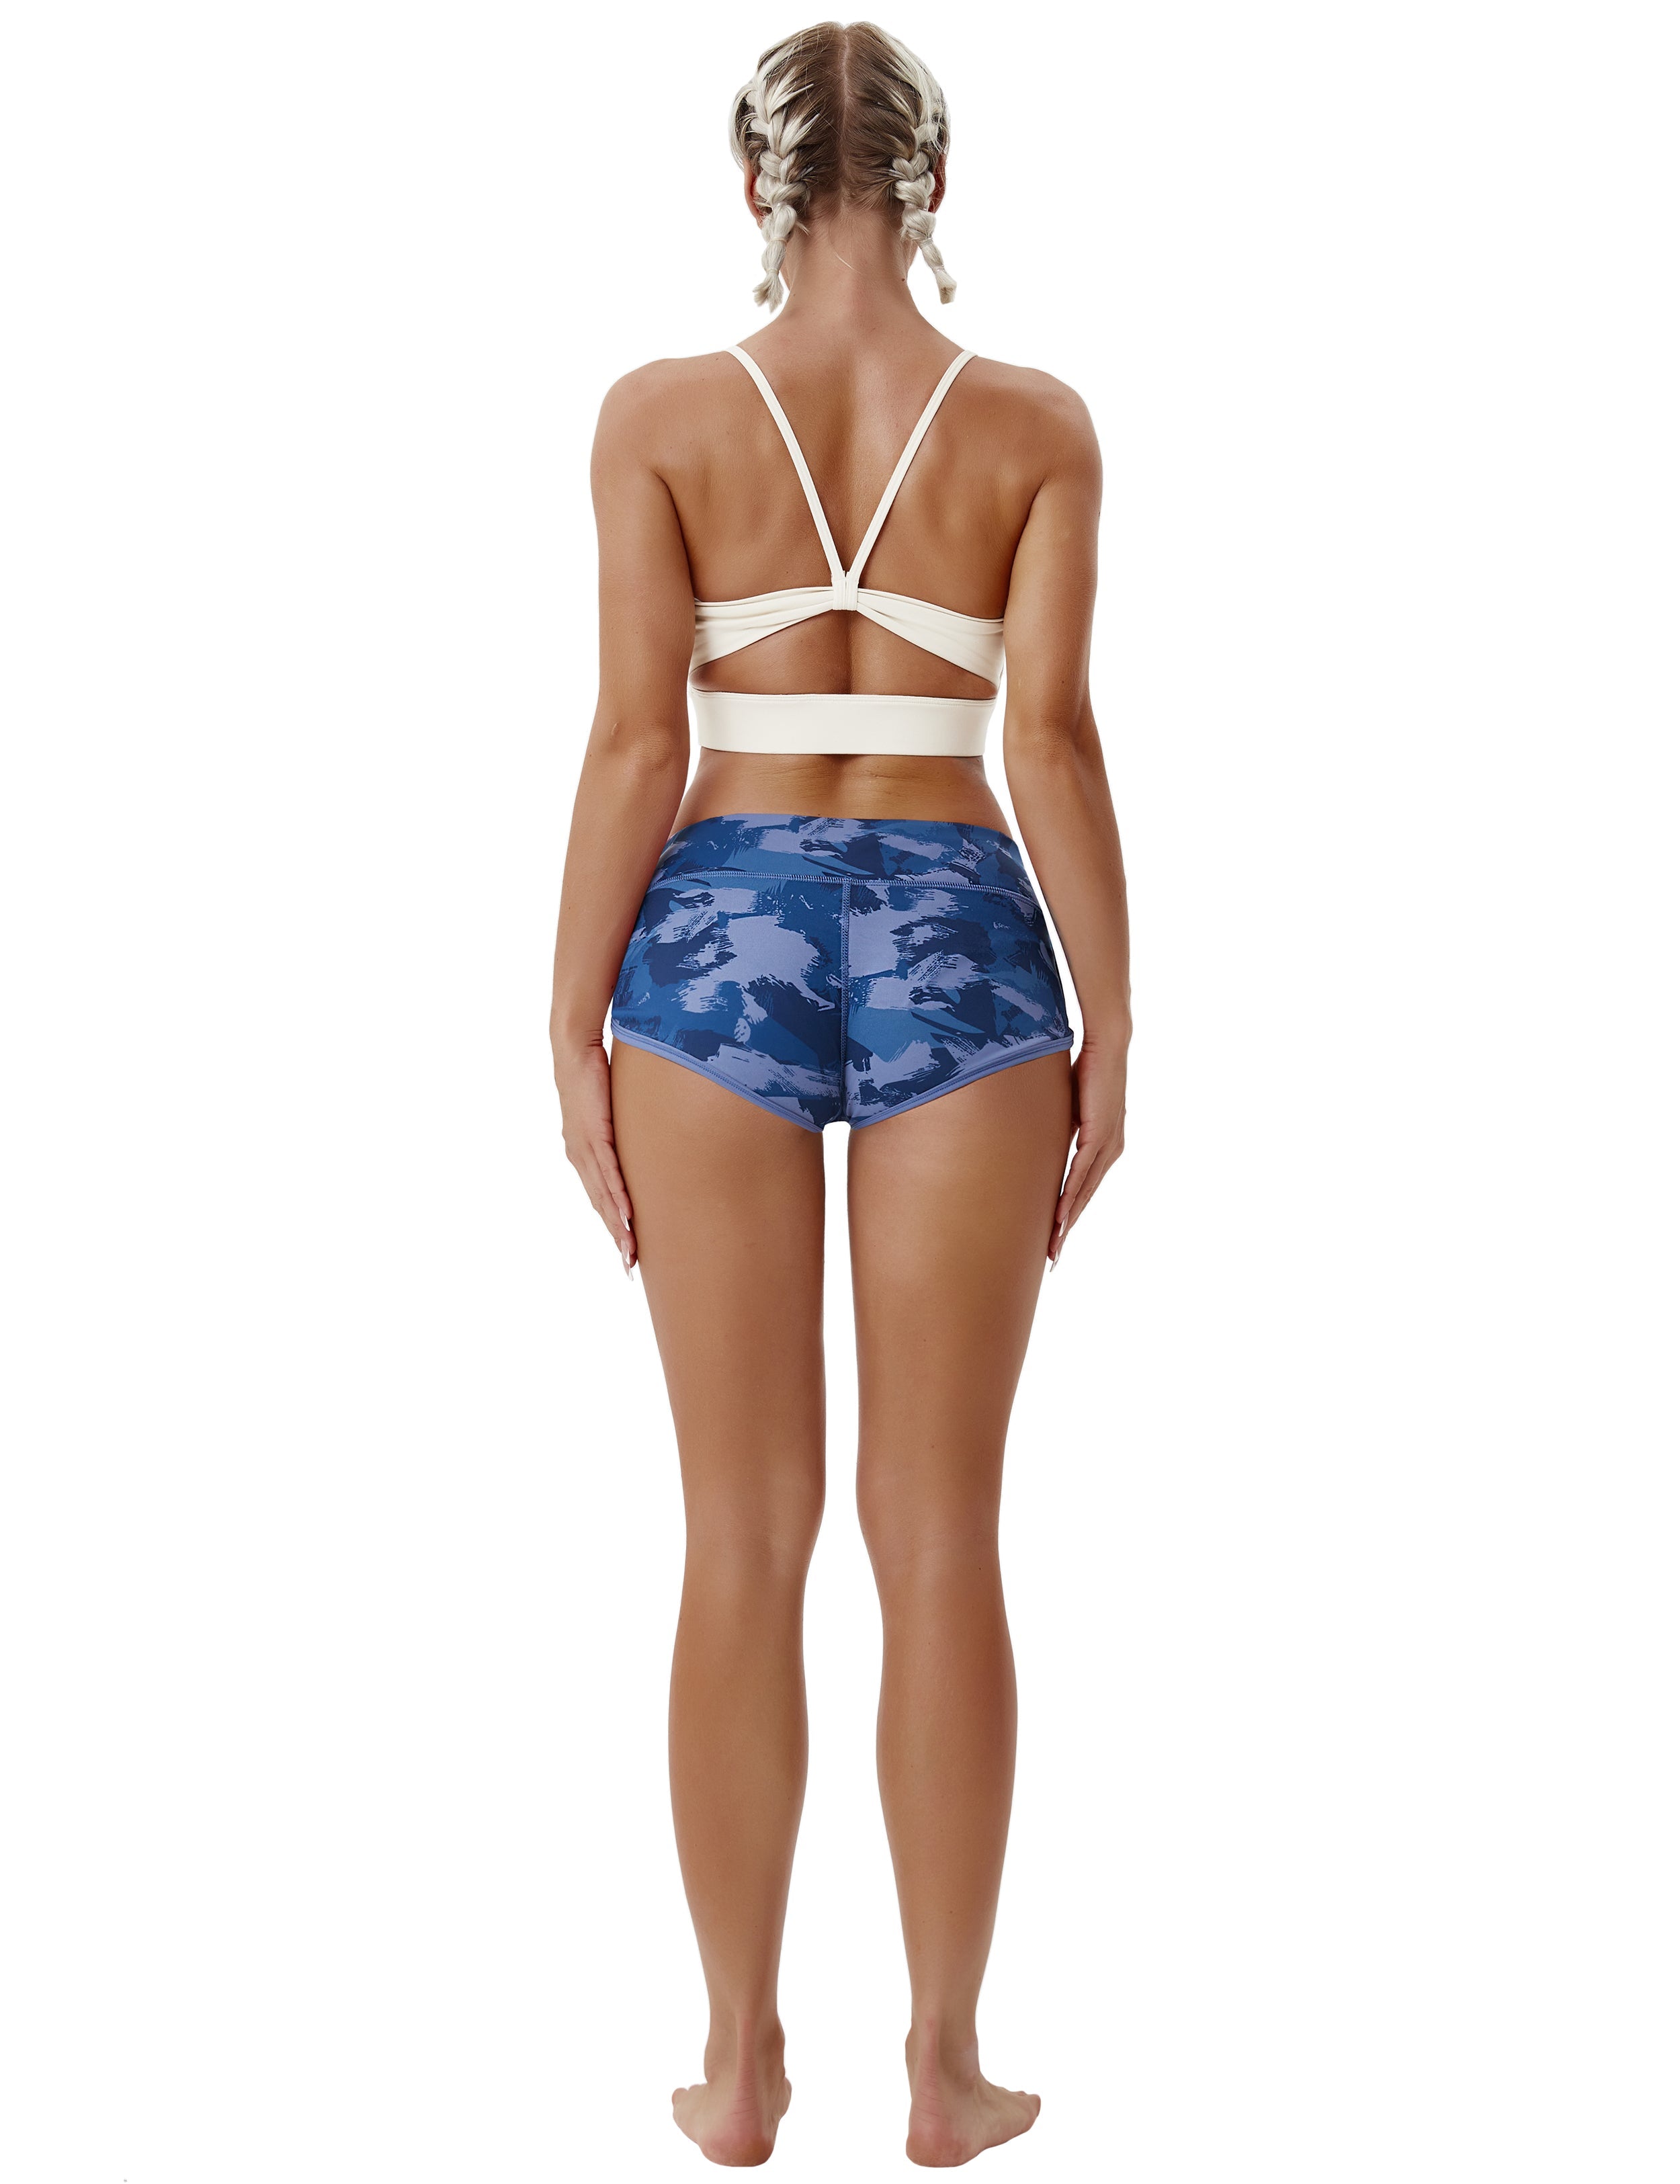 Printed Booty Plus Size Shorts navy brushcamo Sleek, soft, smooth and totally comfortable: our newest sexy style is here. Softest-ever fabric High elasticity High density 4-way stretch Fabric doesn't attract lint easily No see-through Moisture-wicking Machine wash 78% Polyester, 22% Spandex